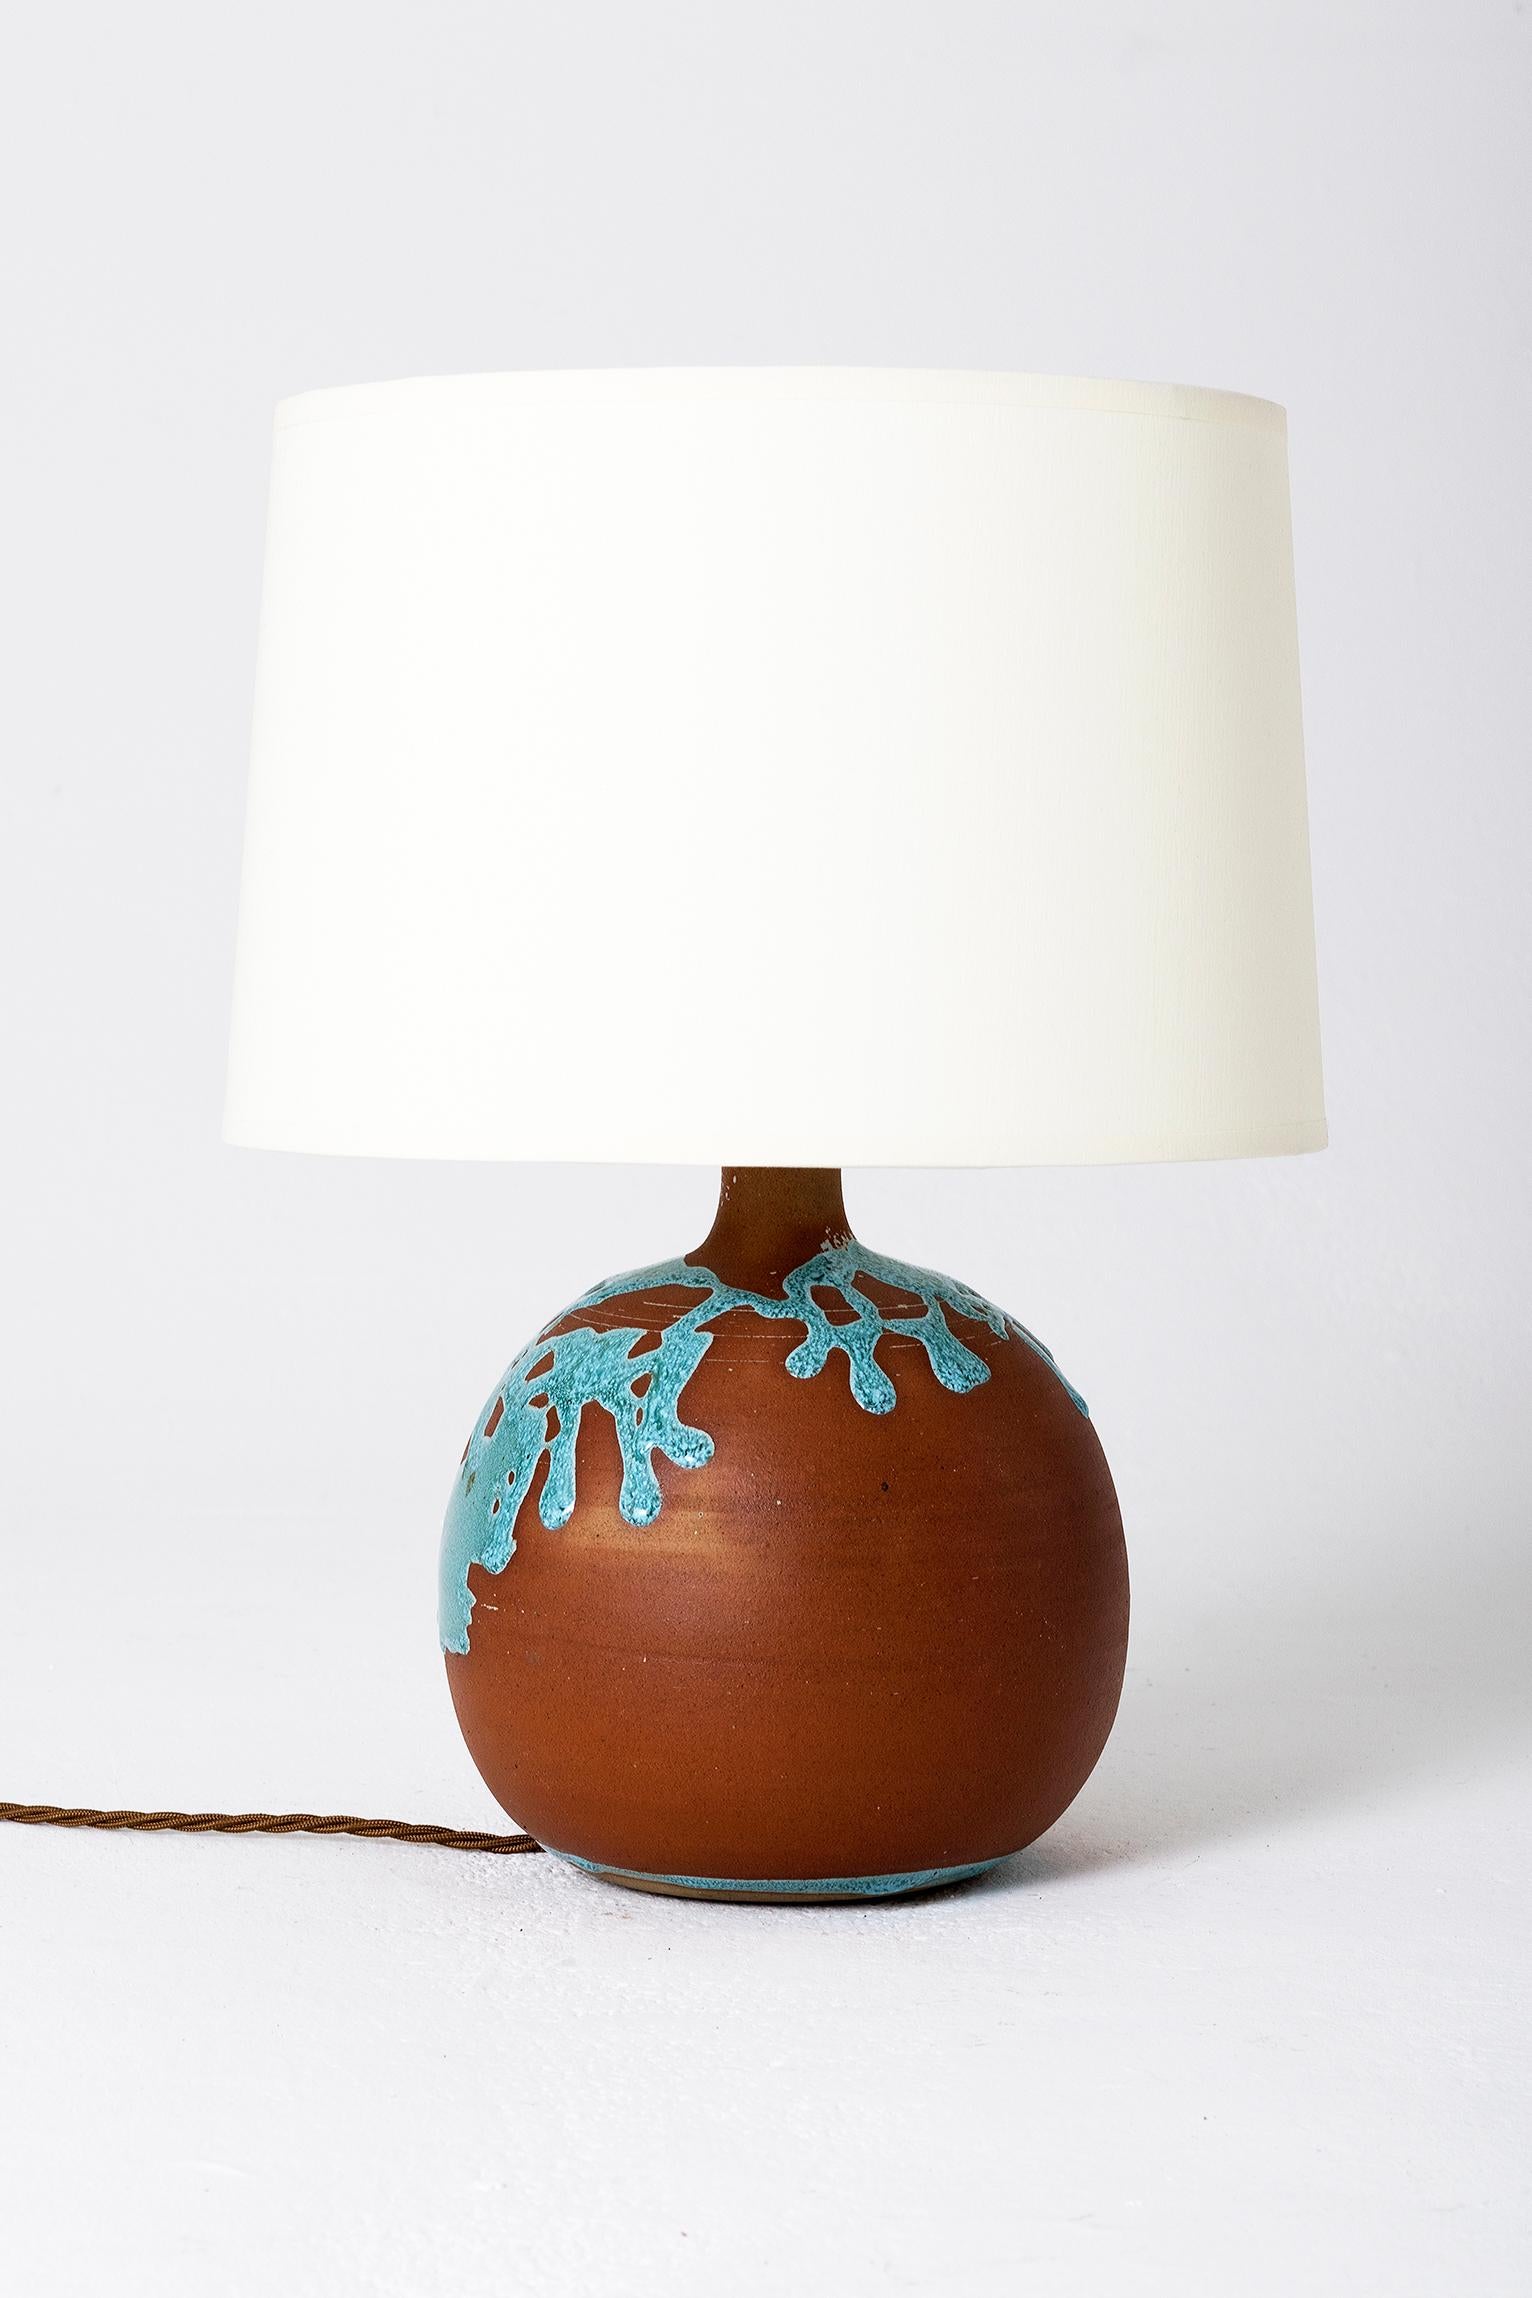 A terracotta and turquoise glaze table lamp
France, circa 1960
Measures: With the shade 39.5 cm high by 25 cm diameter
Lamp base only 22 cm high by 19 cm diameter.